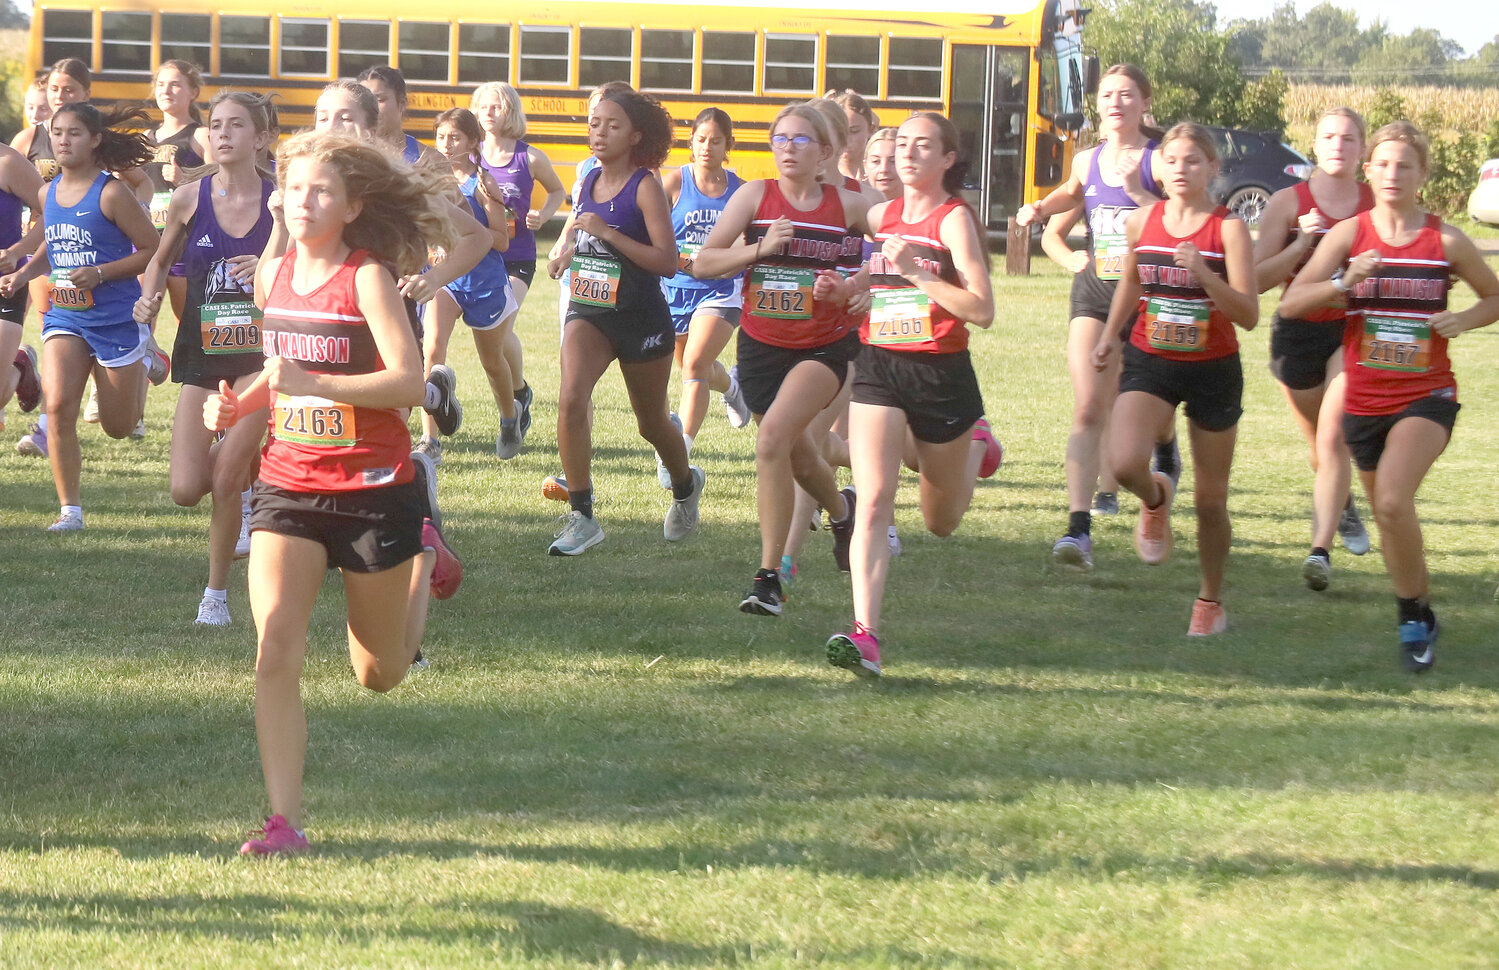 Fort Madison sophomore Avery Rump works to the front of the pack before the chute at Rodeo Park Thursday during the varsity girls' cross country run at the Timm Lamb Invitational. Rump would win the event with a 19:48.3. The Lady Hounds finished 2nd behind Washington.